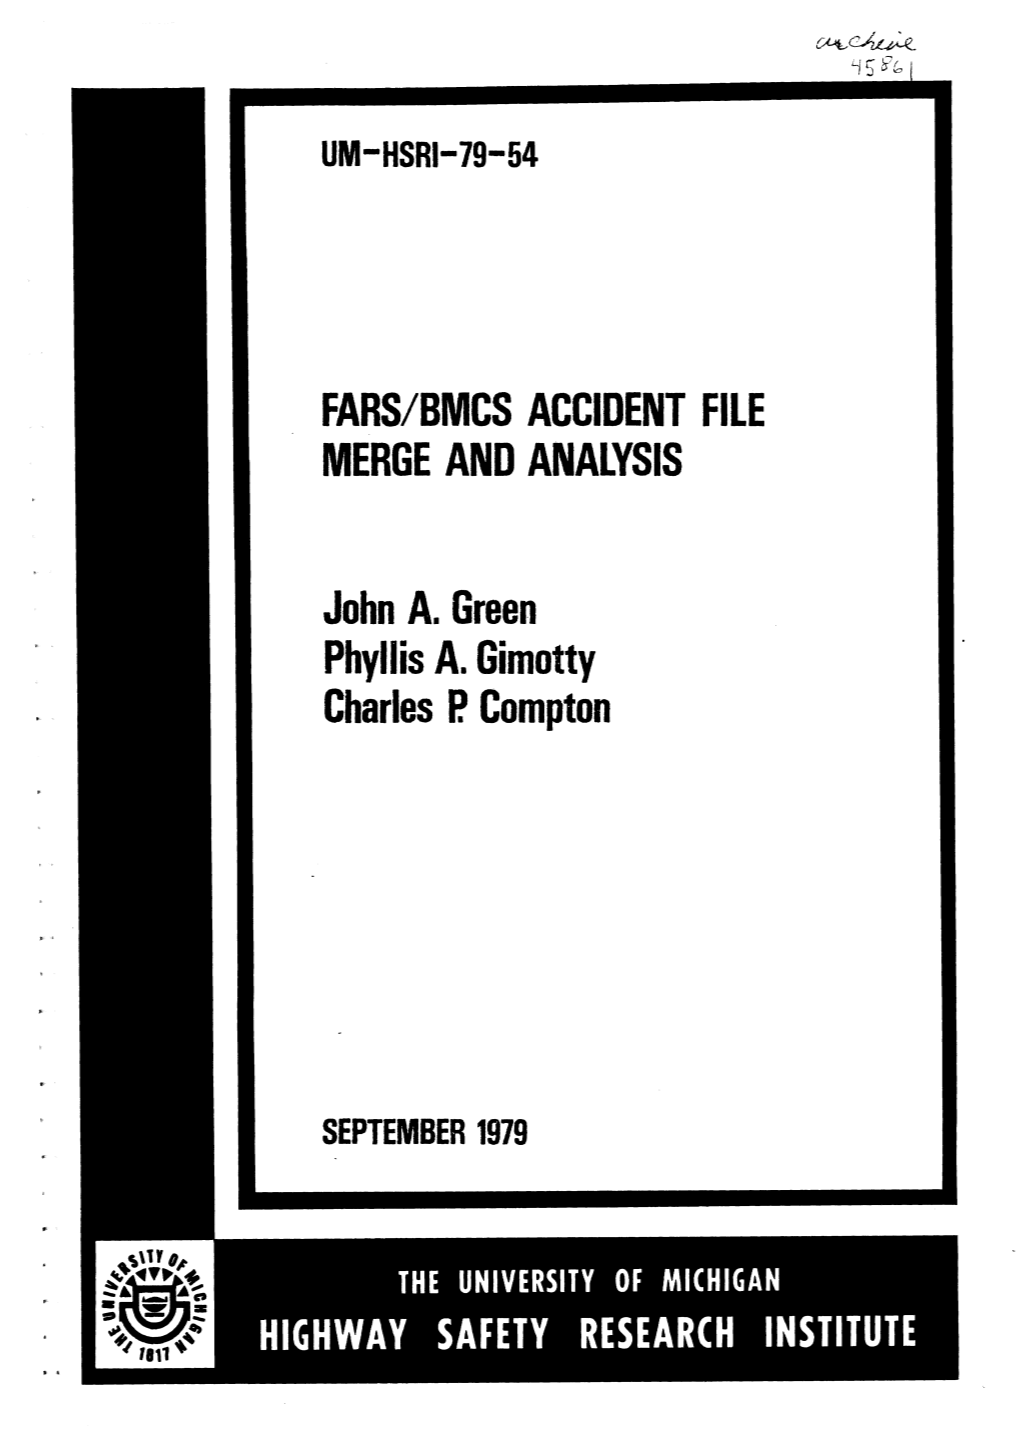 Fars/Bmcs Accident File Merge and Analysis